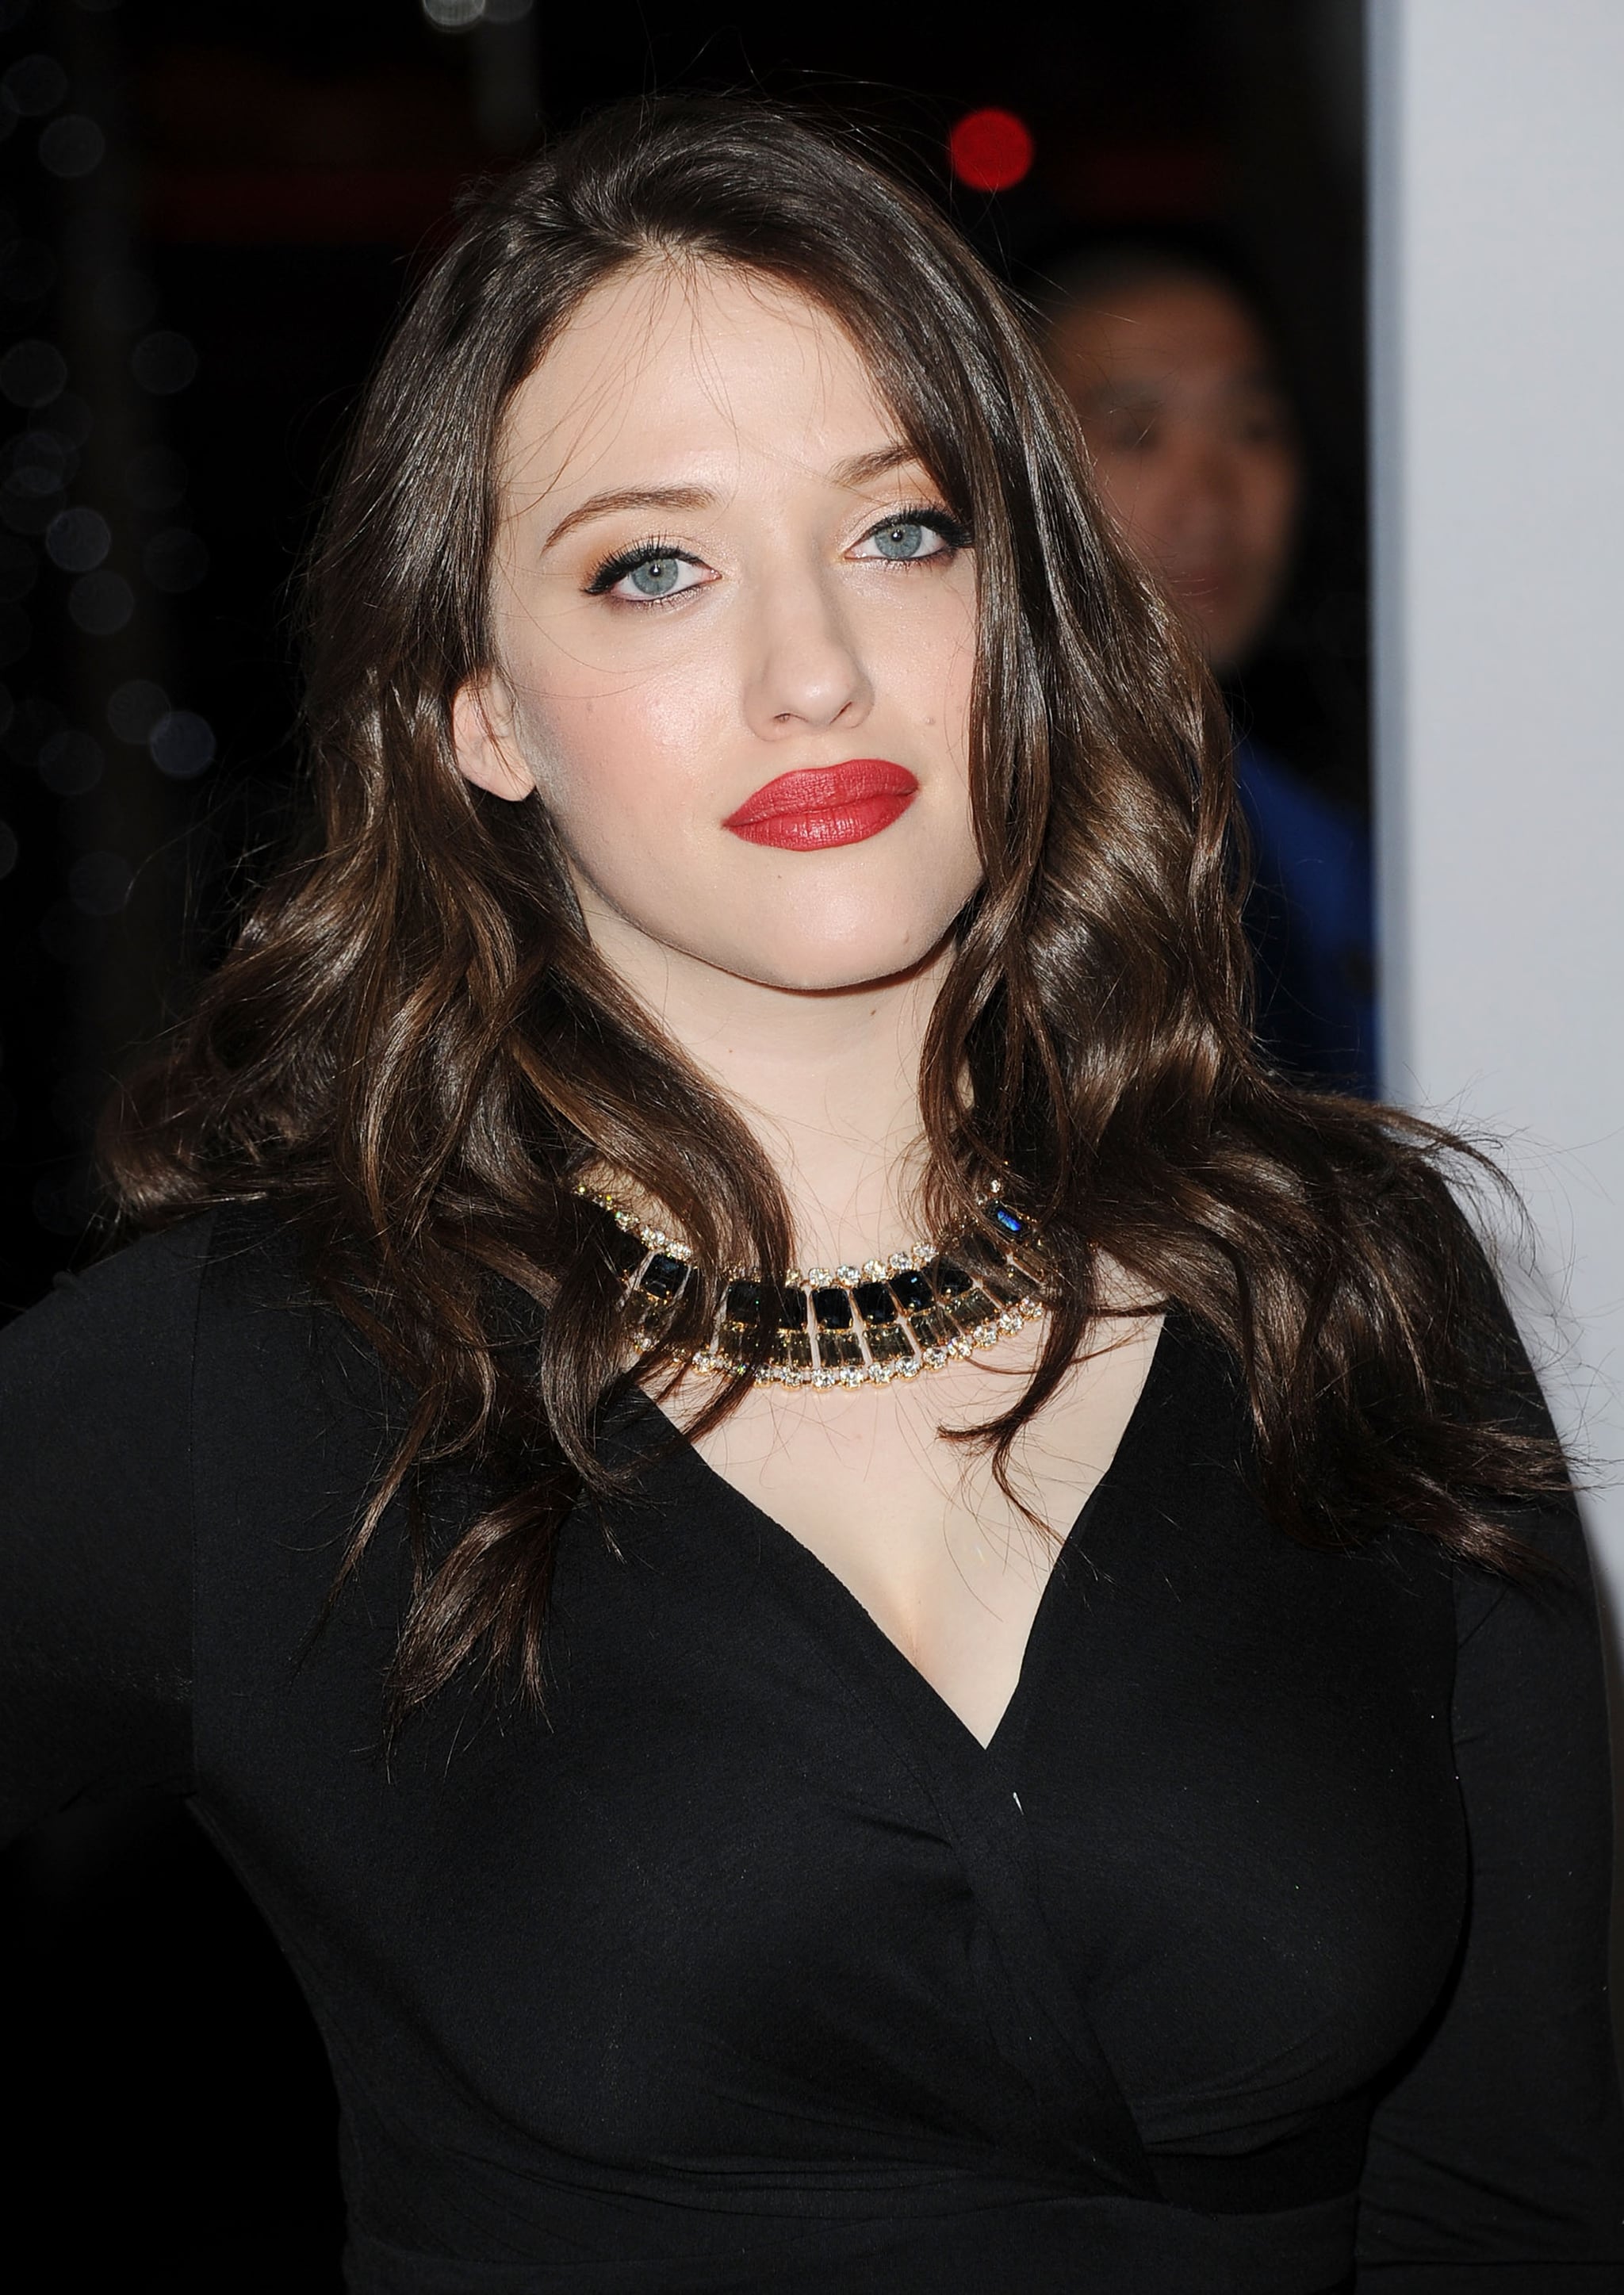 Kat Dennings had red lips at the People's Choice Awards.